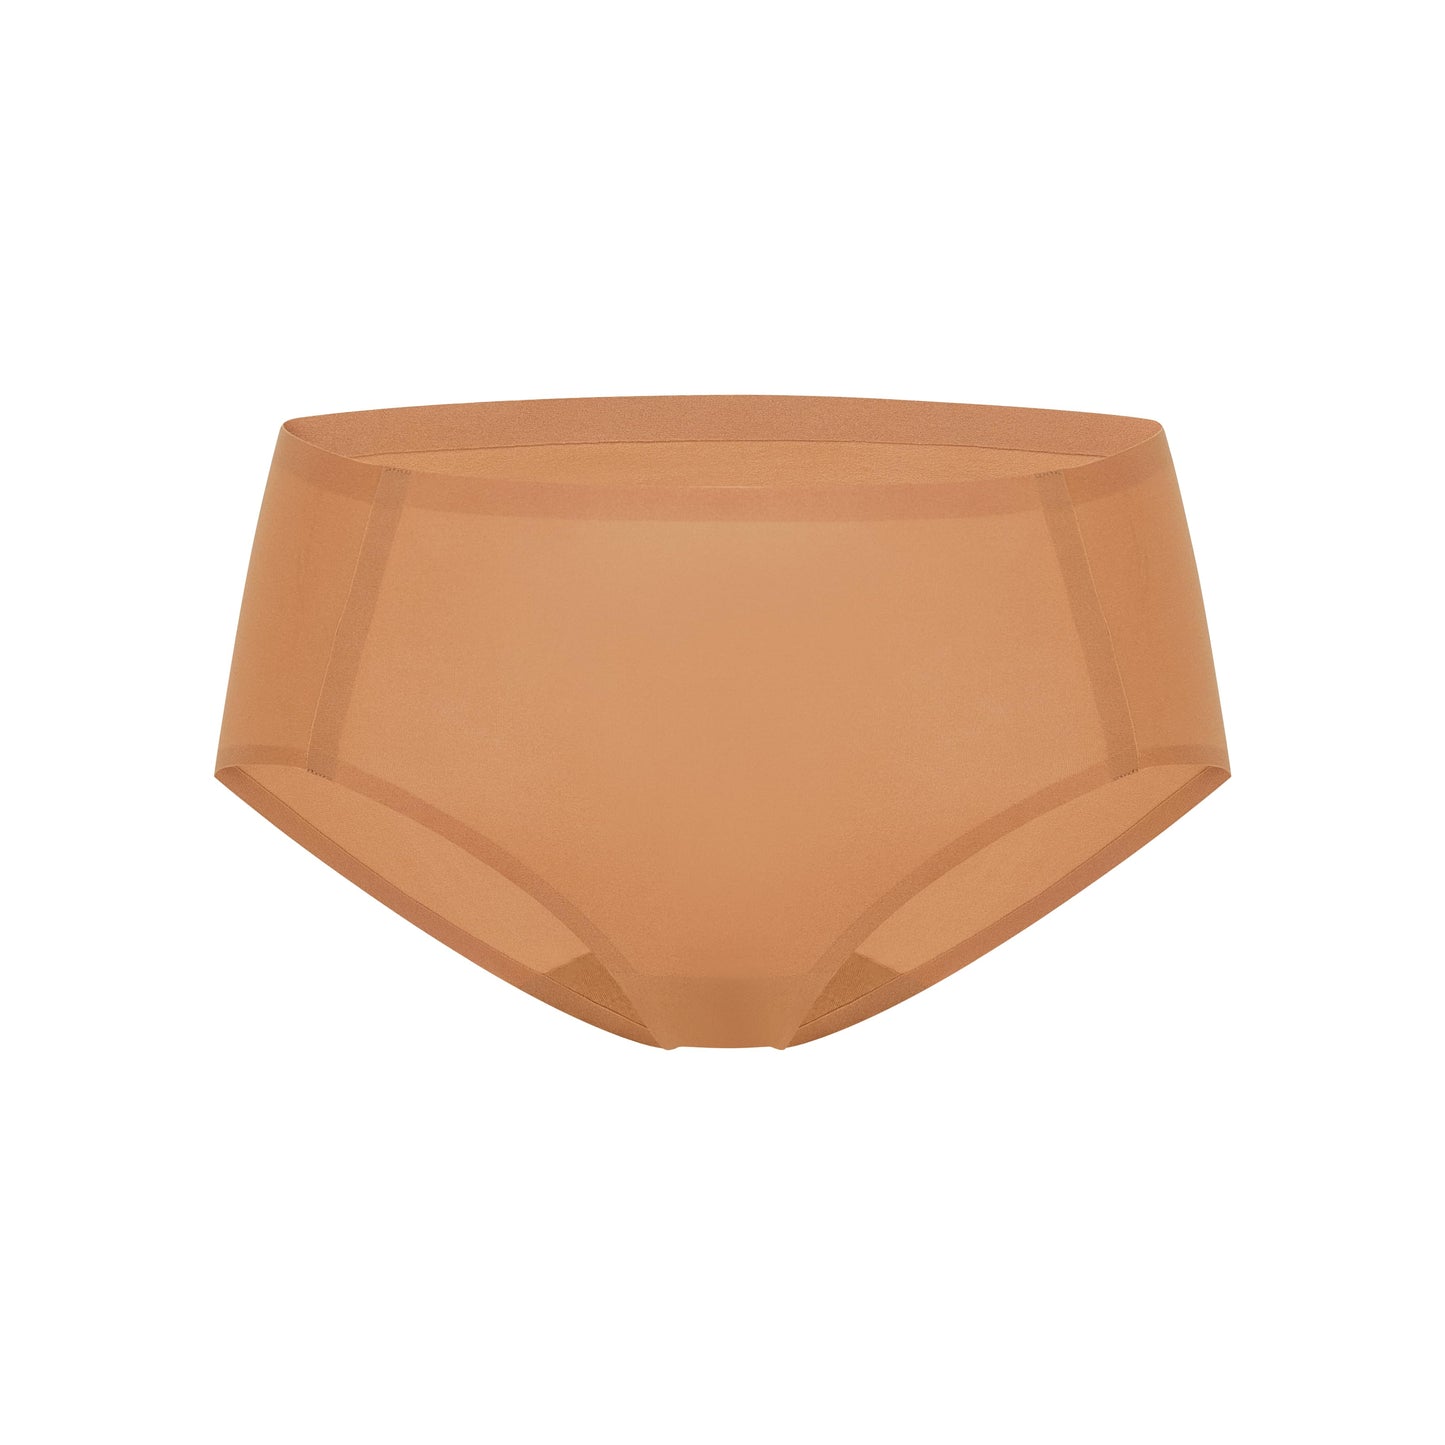 flay lay image of tanned orange brief